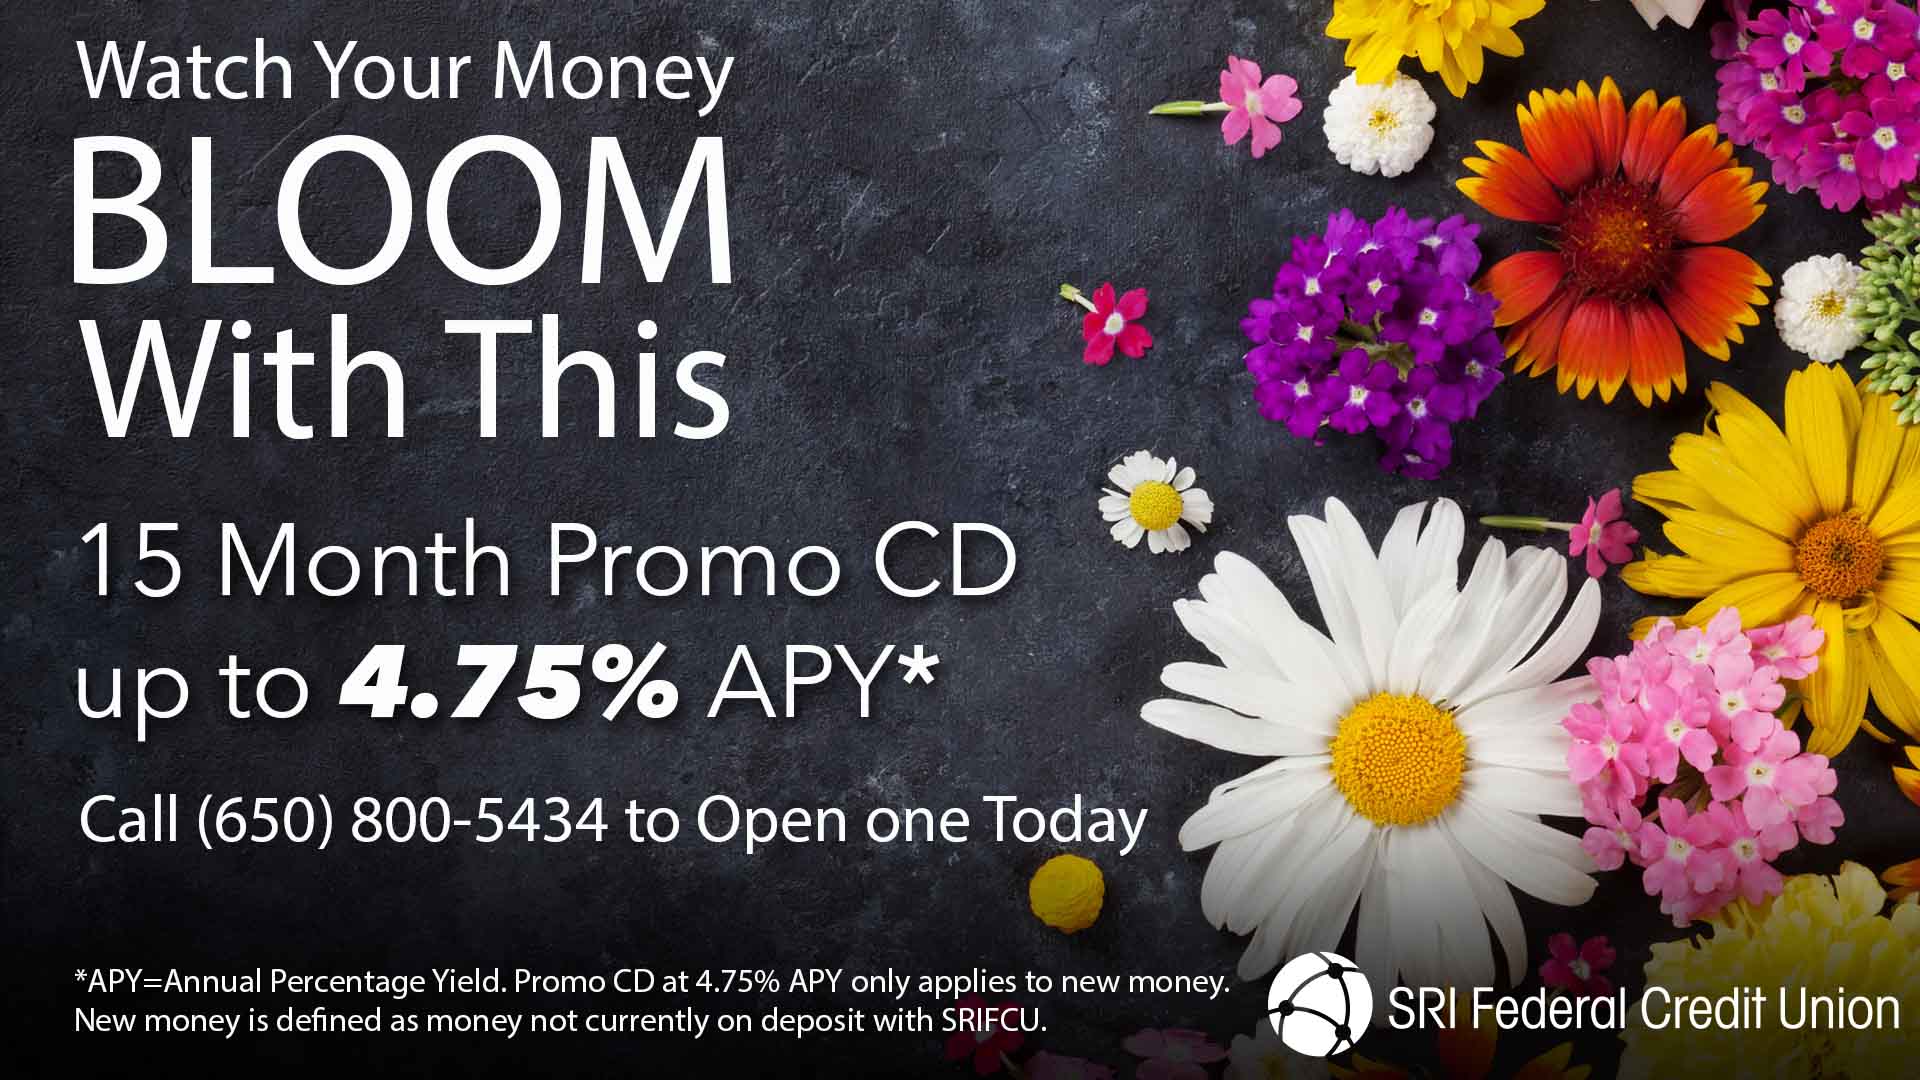 15 month Promo CD rate up to 4.75% APY, get yours today!